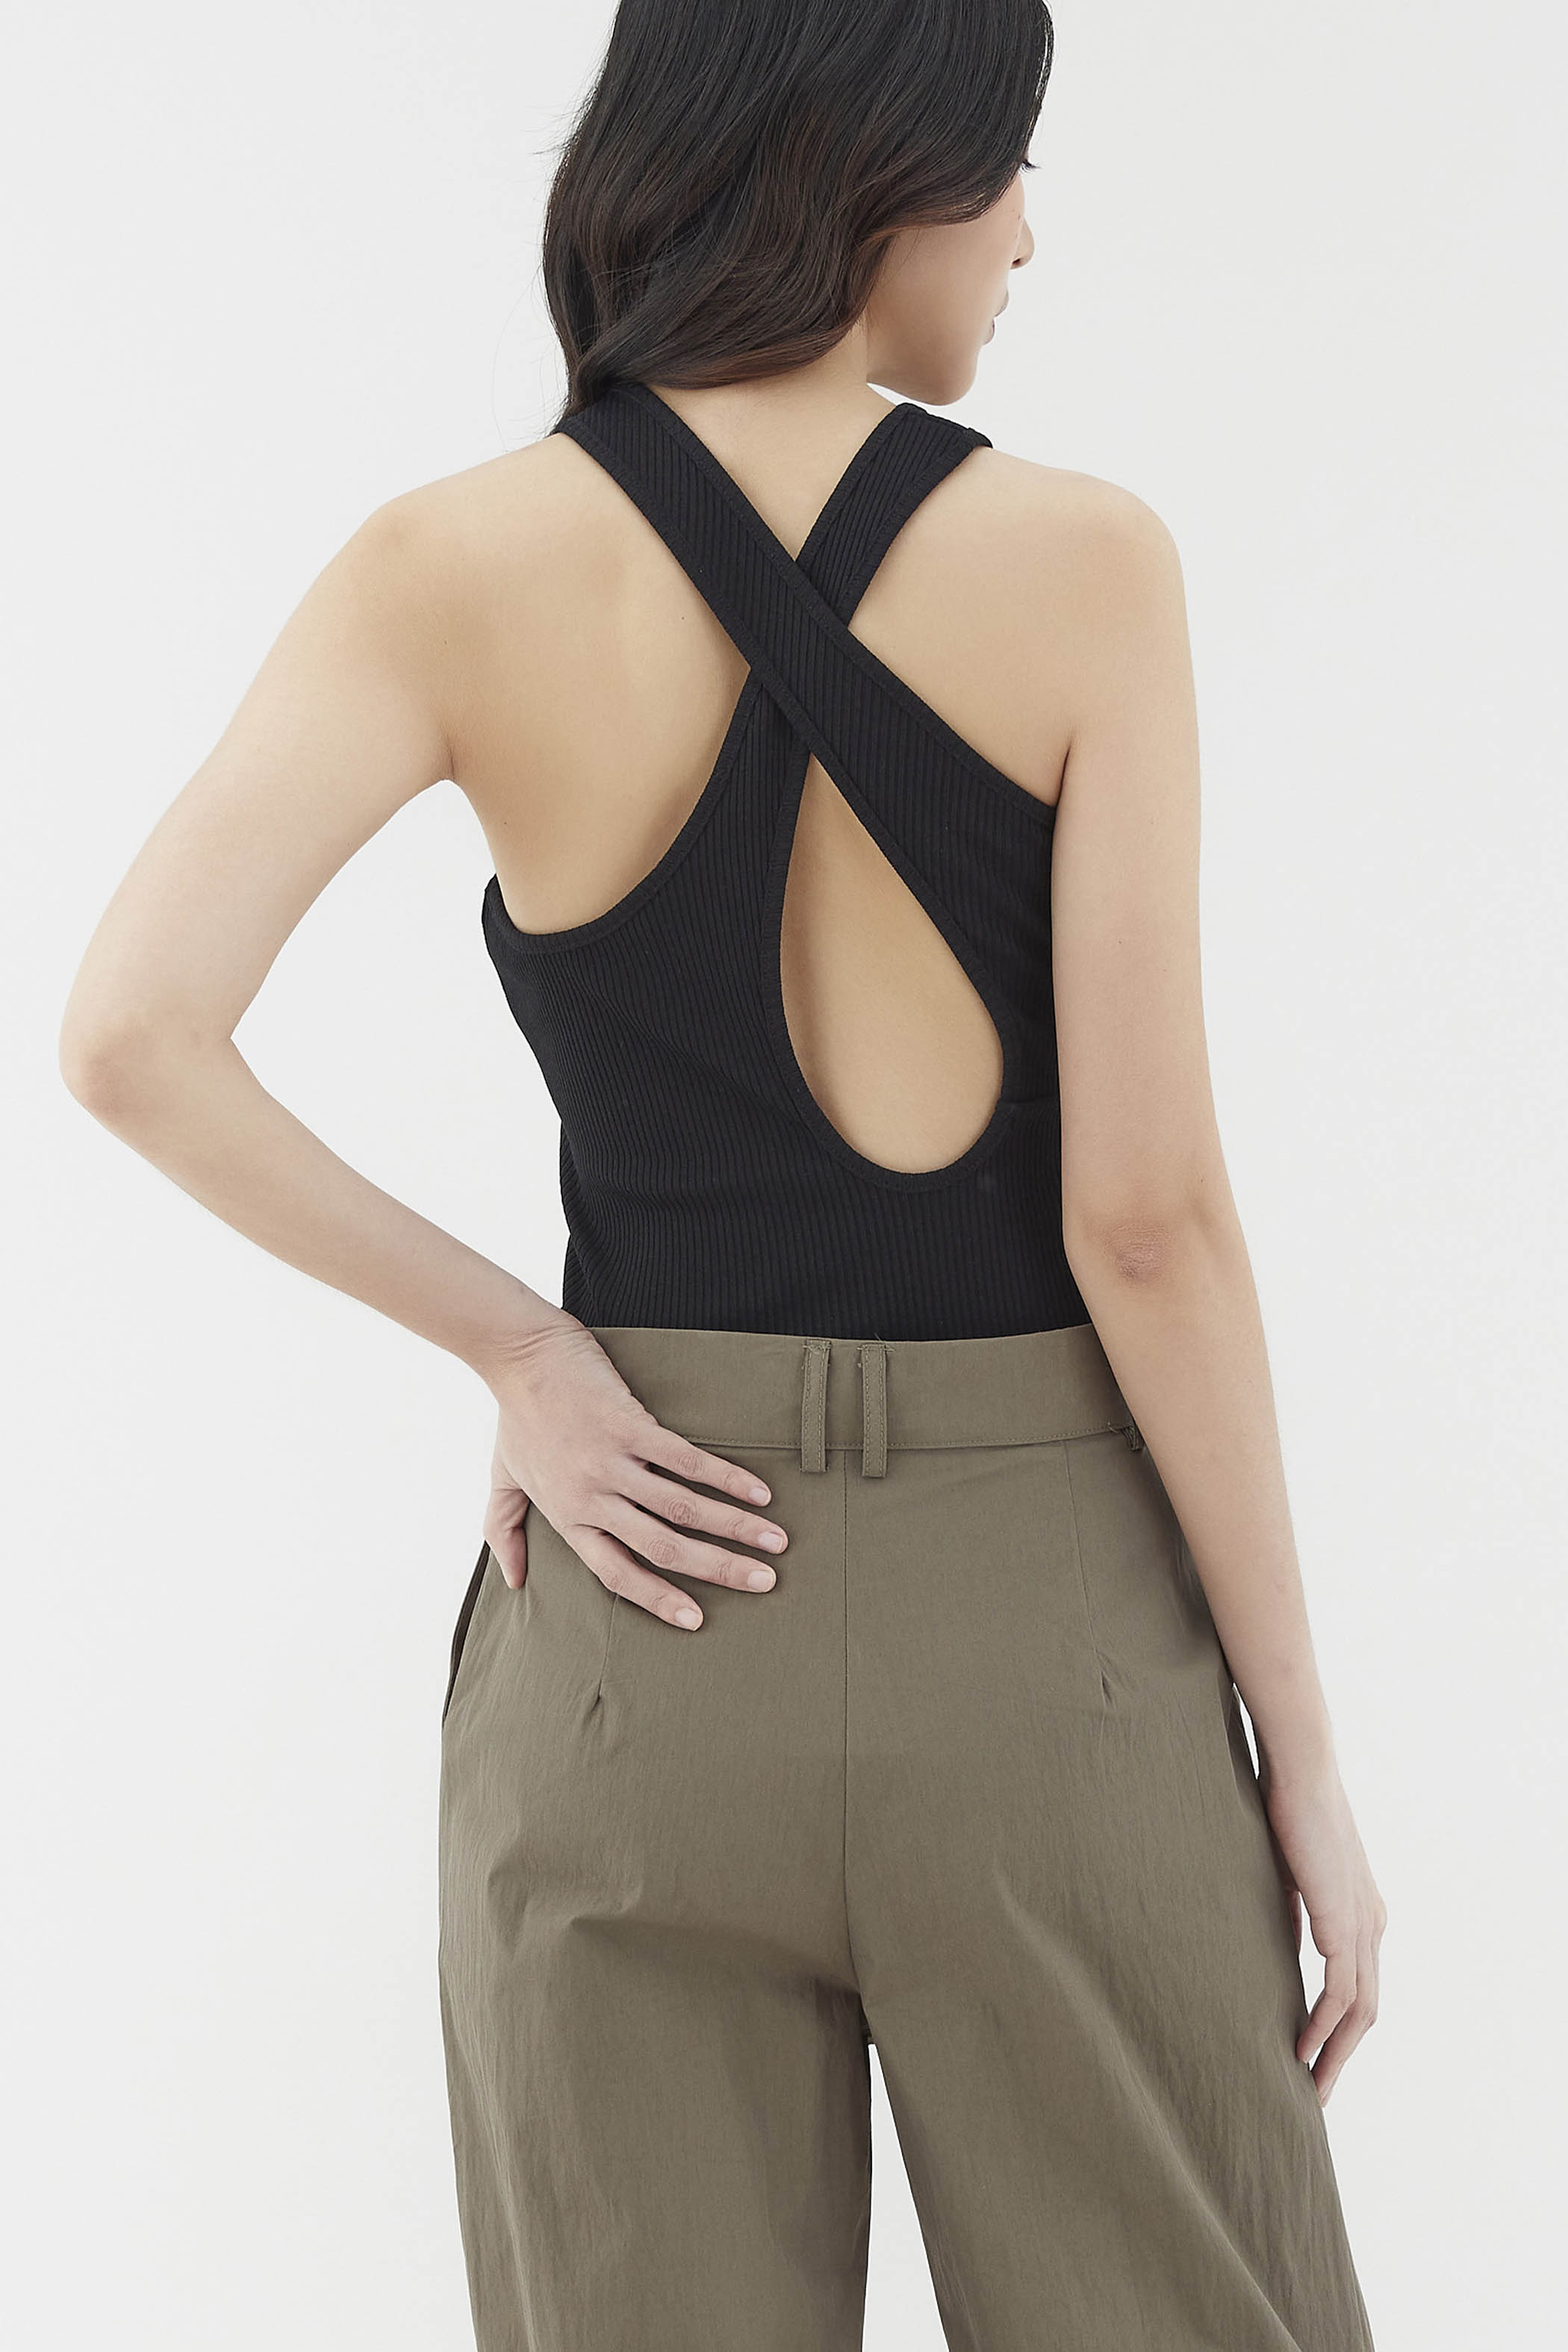 Malca Cut-Out Back Top